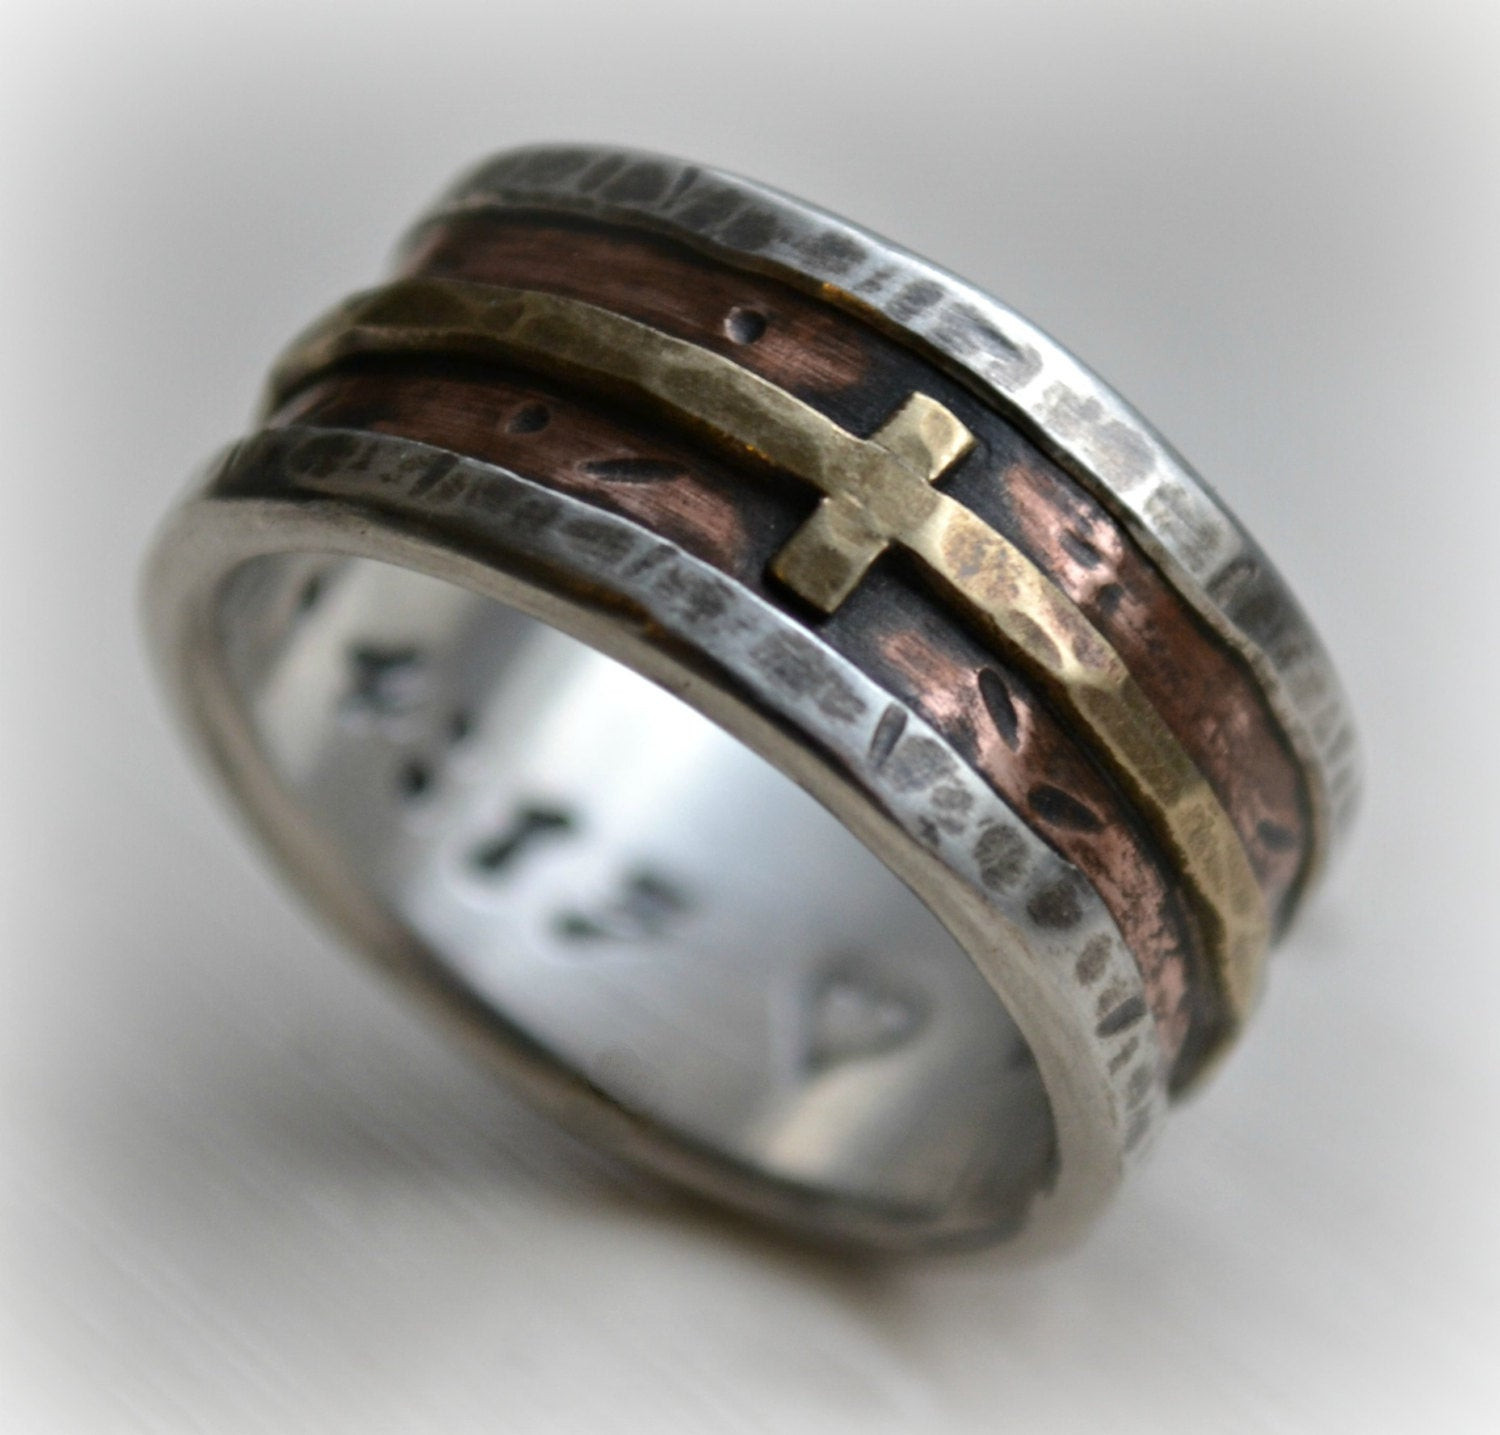 Christian Wedding Rings
 mens wedding band rustic fine silver copper and brass cross